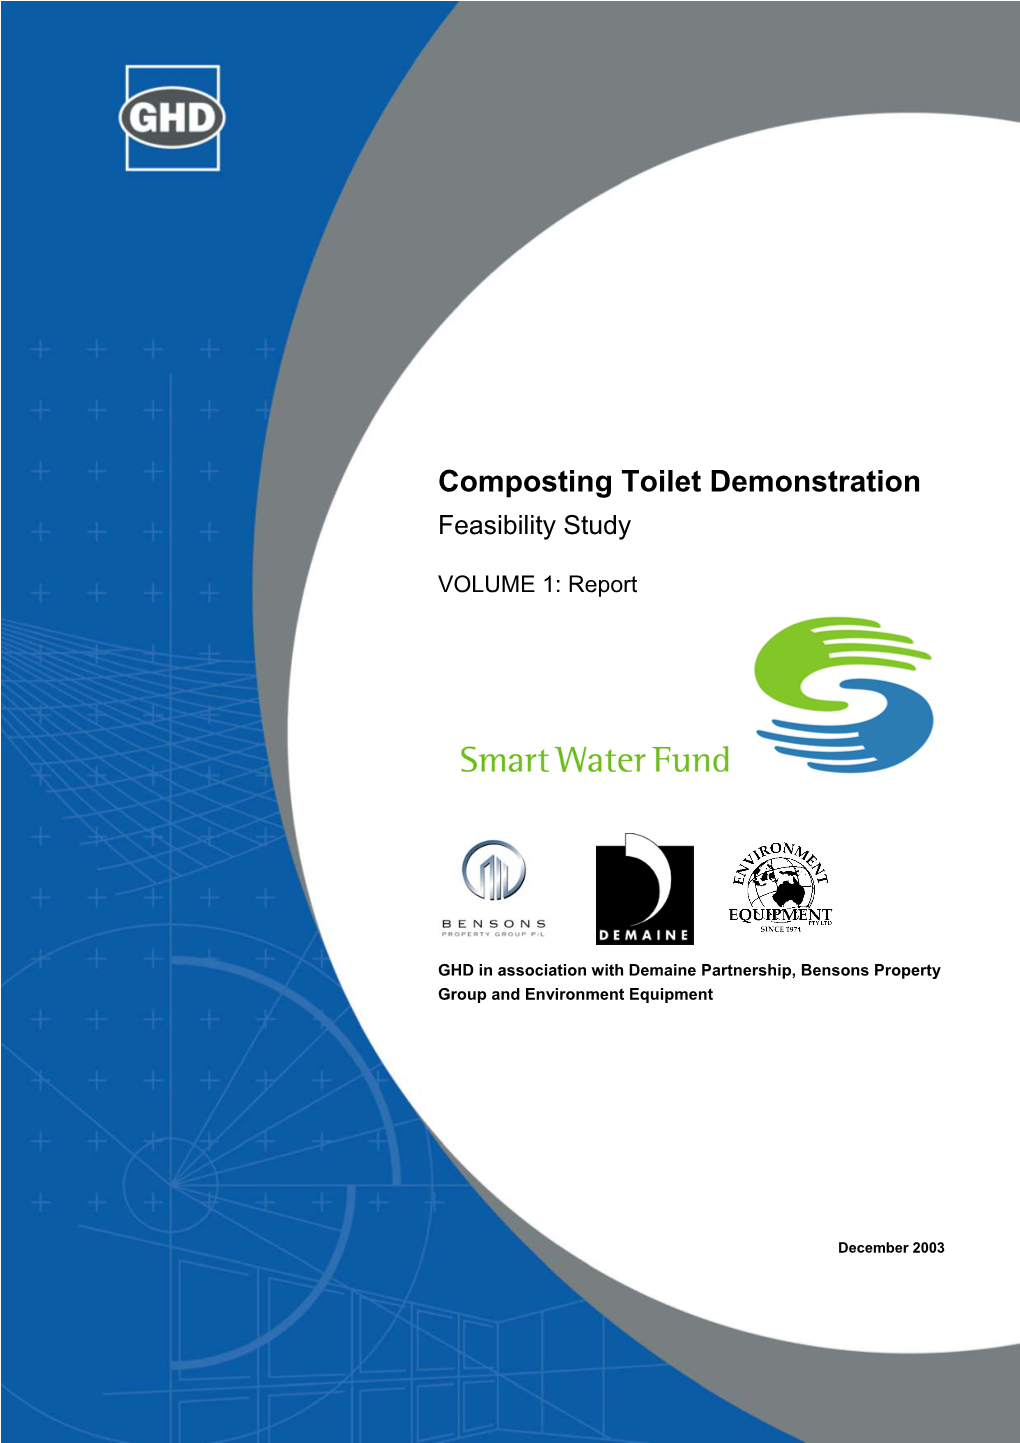 Composting Toilet Demonstration Feasibility Study